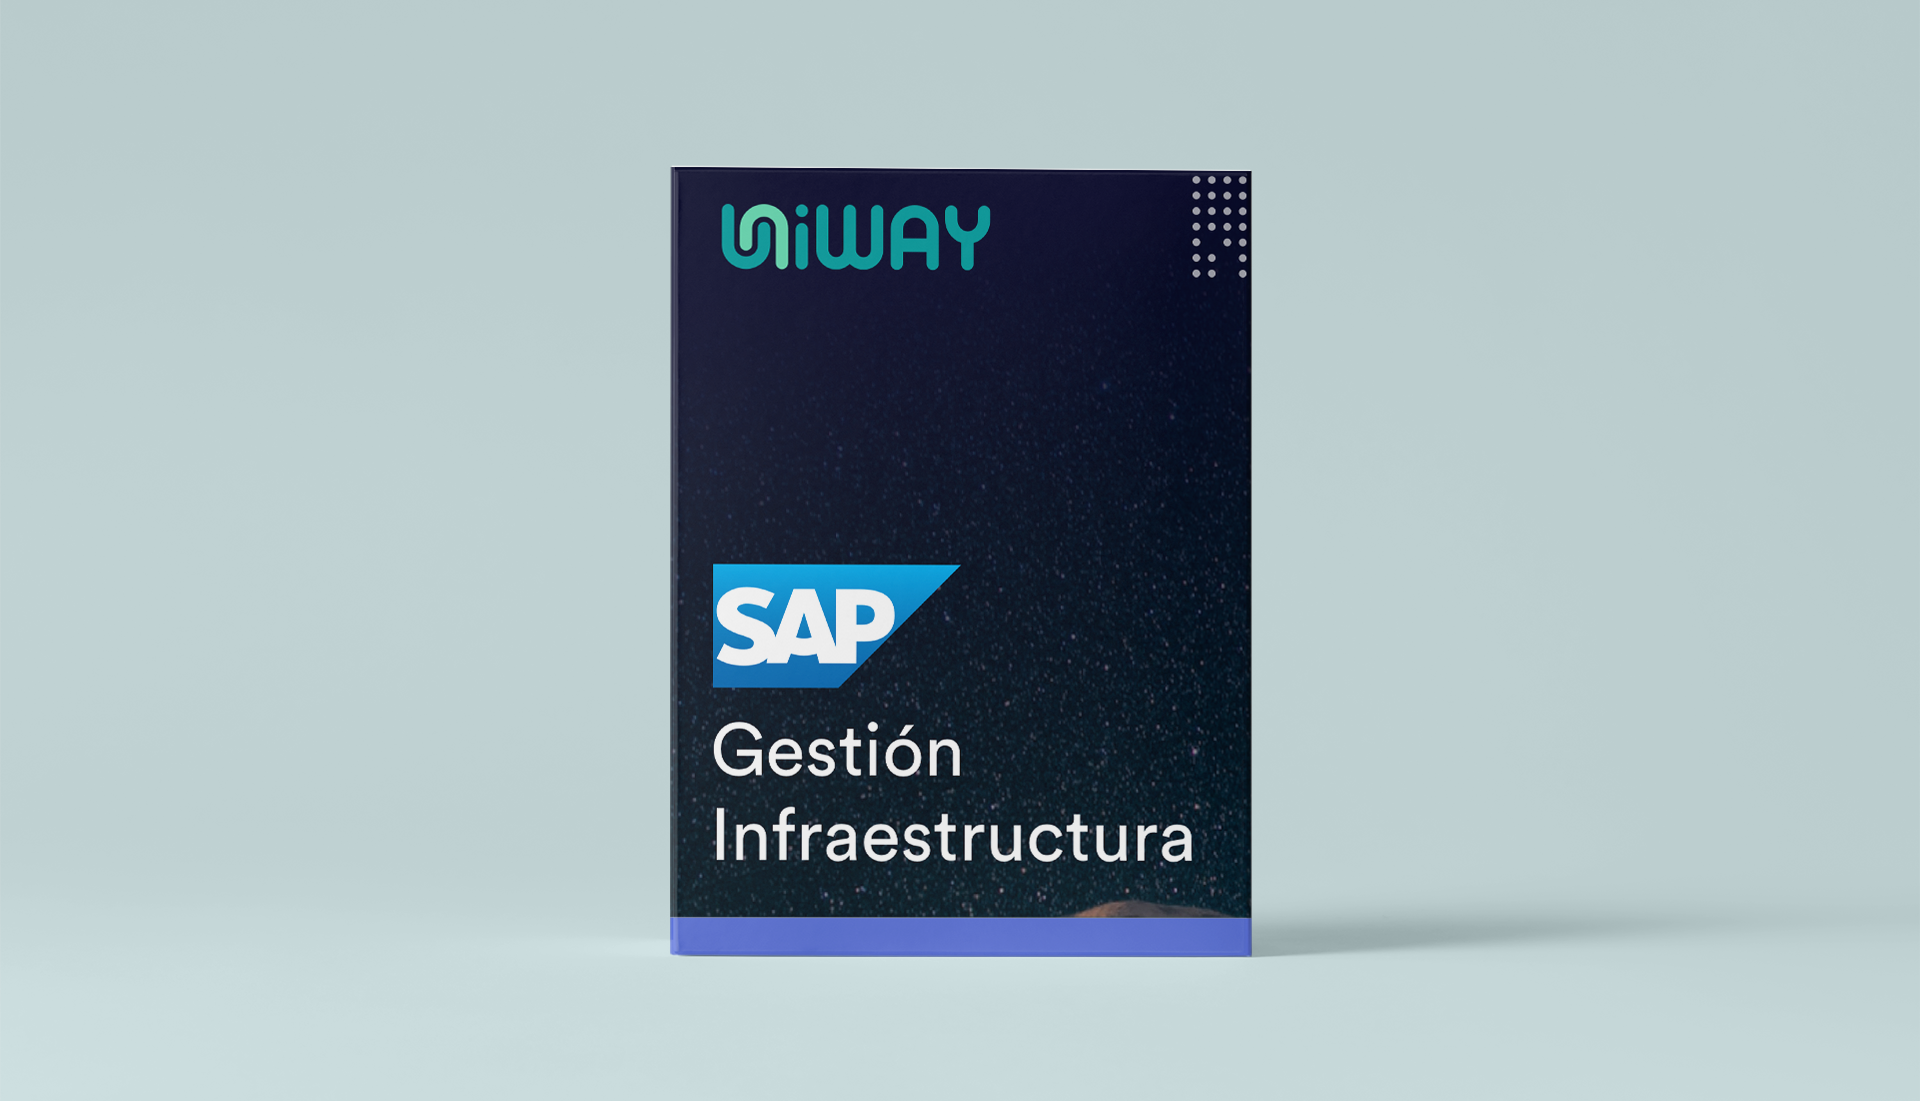 Centralized management of SAP infrastructure